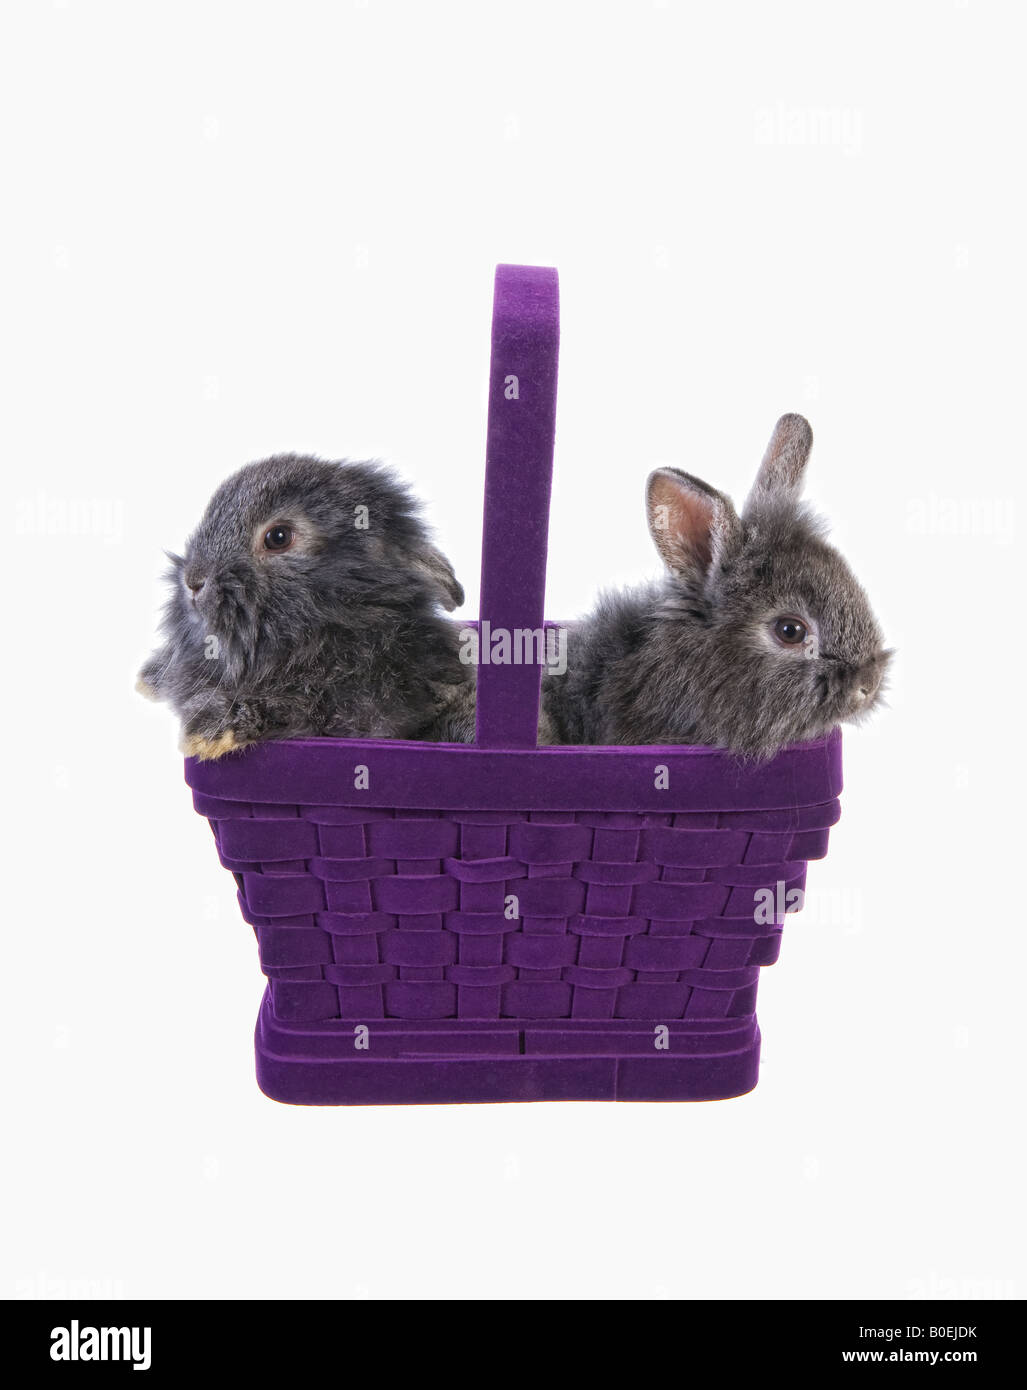 Two cute baby bunny rabbits in purple velvet basket isolated on white background Stock Photo